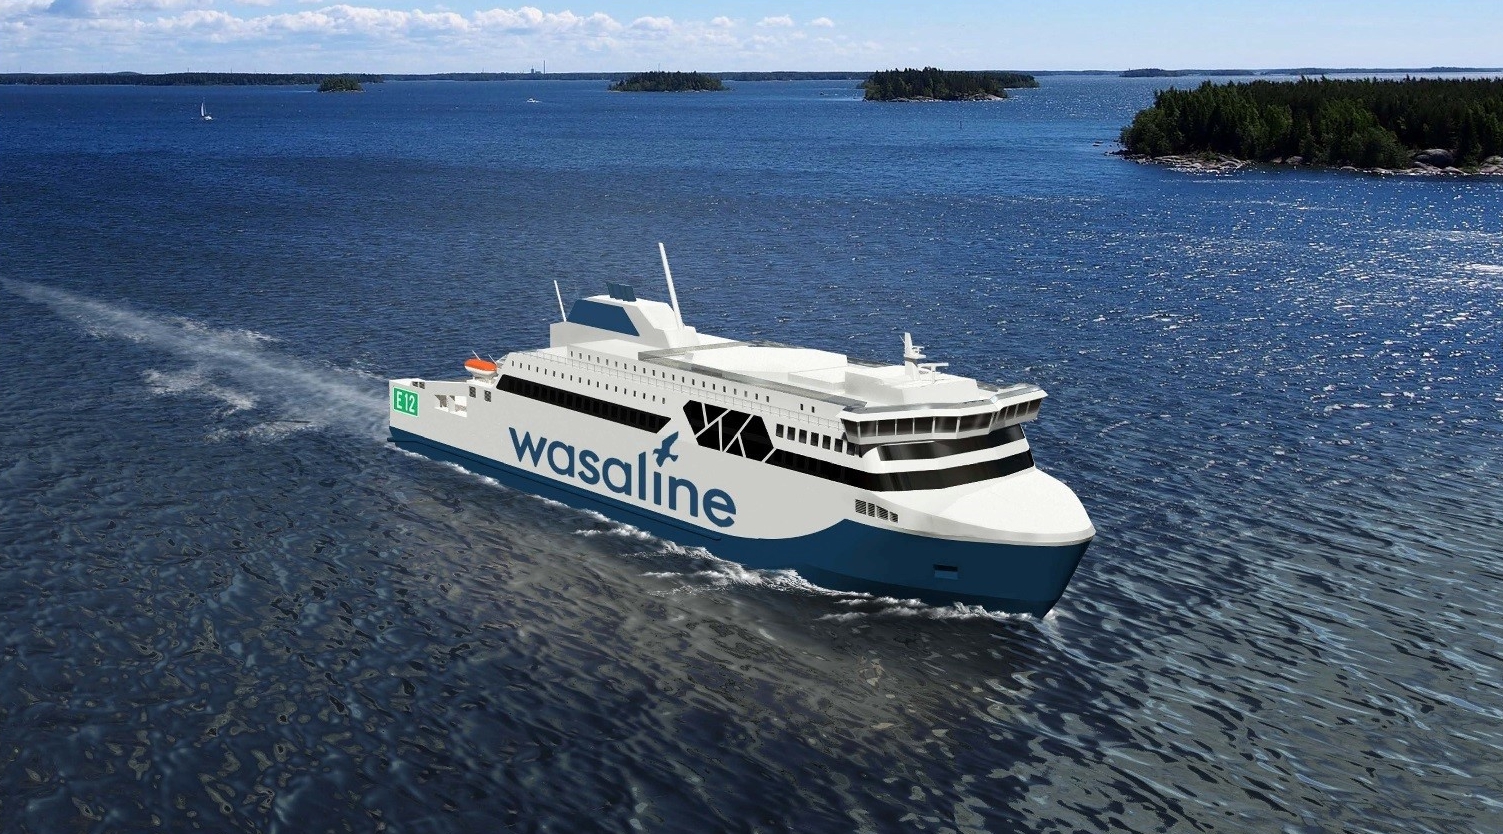 RMC to build LNG-hybrid ferry for Kvarken Link